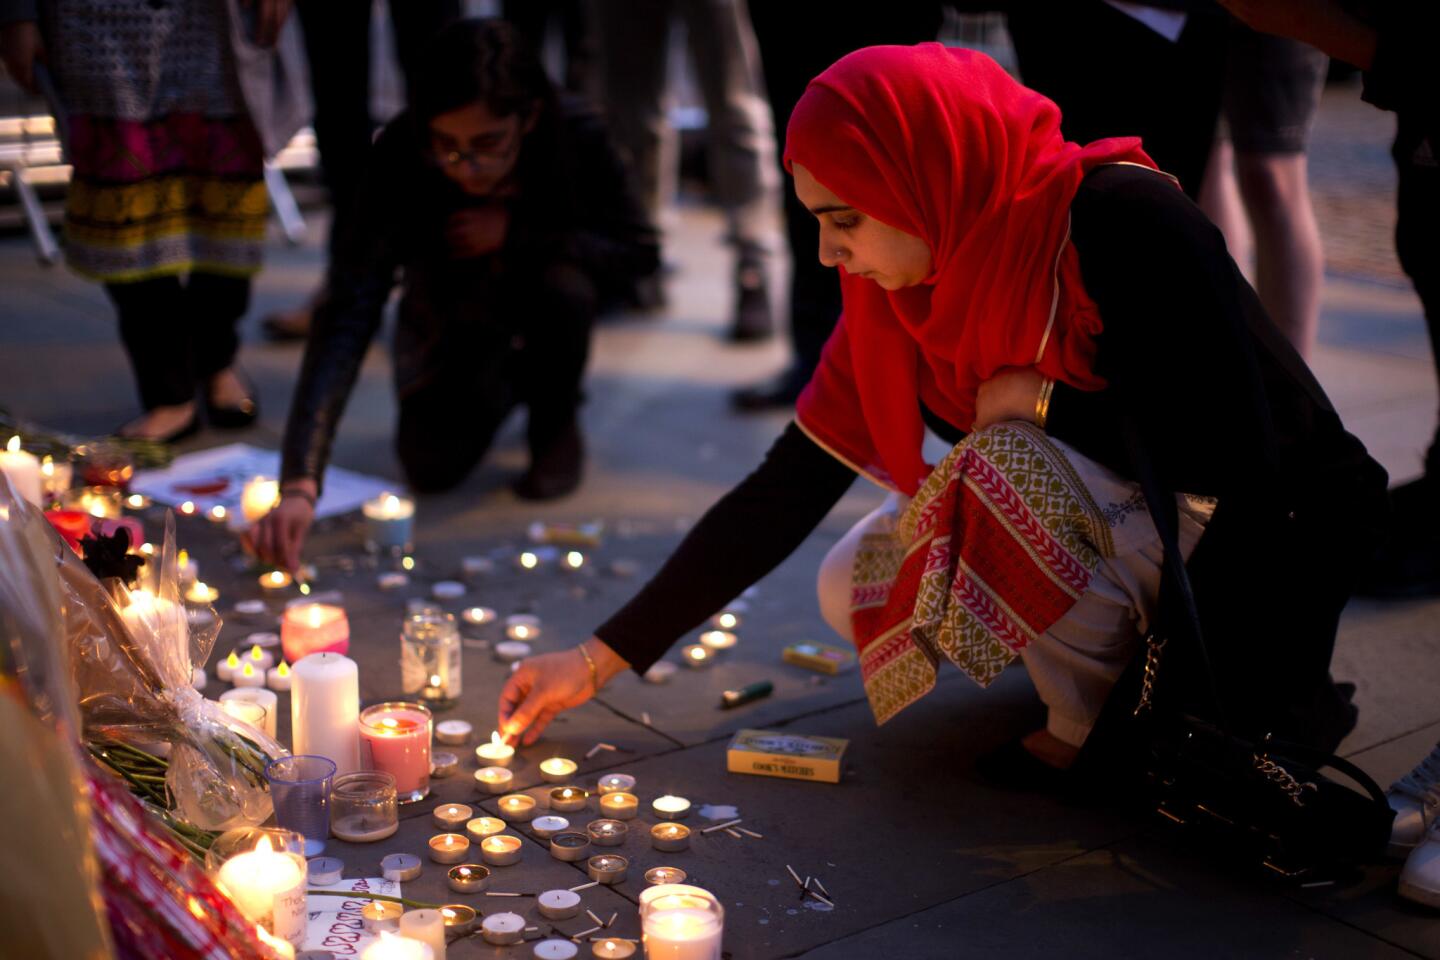 A woman lights candles after a vigil in Manchester, England, on May 23, 2017, the day after a suicide attack at an Ariana Grande concert that left 22 people dead.